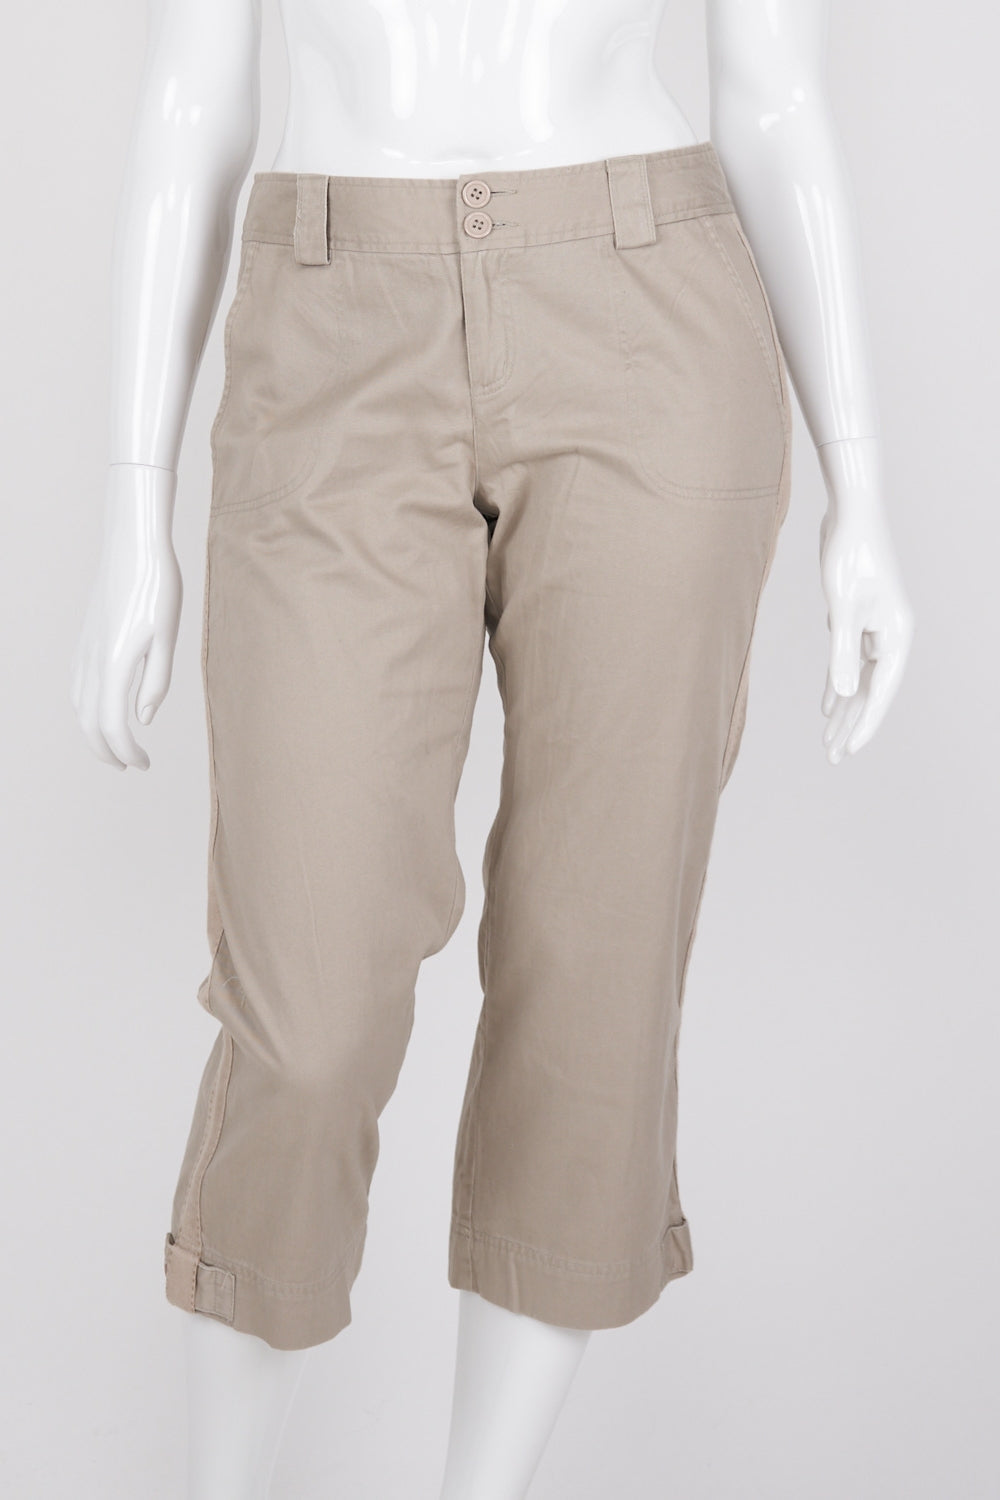 Sussan Brown Cropped Pants 14